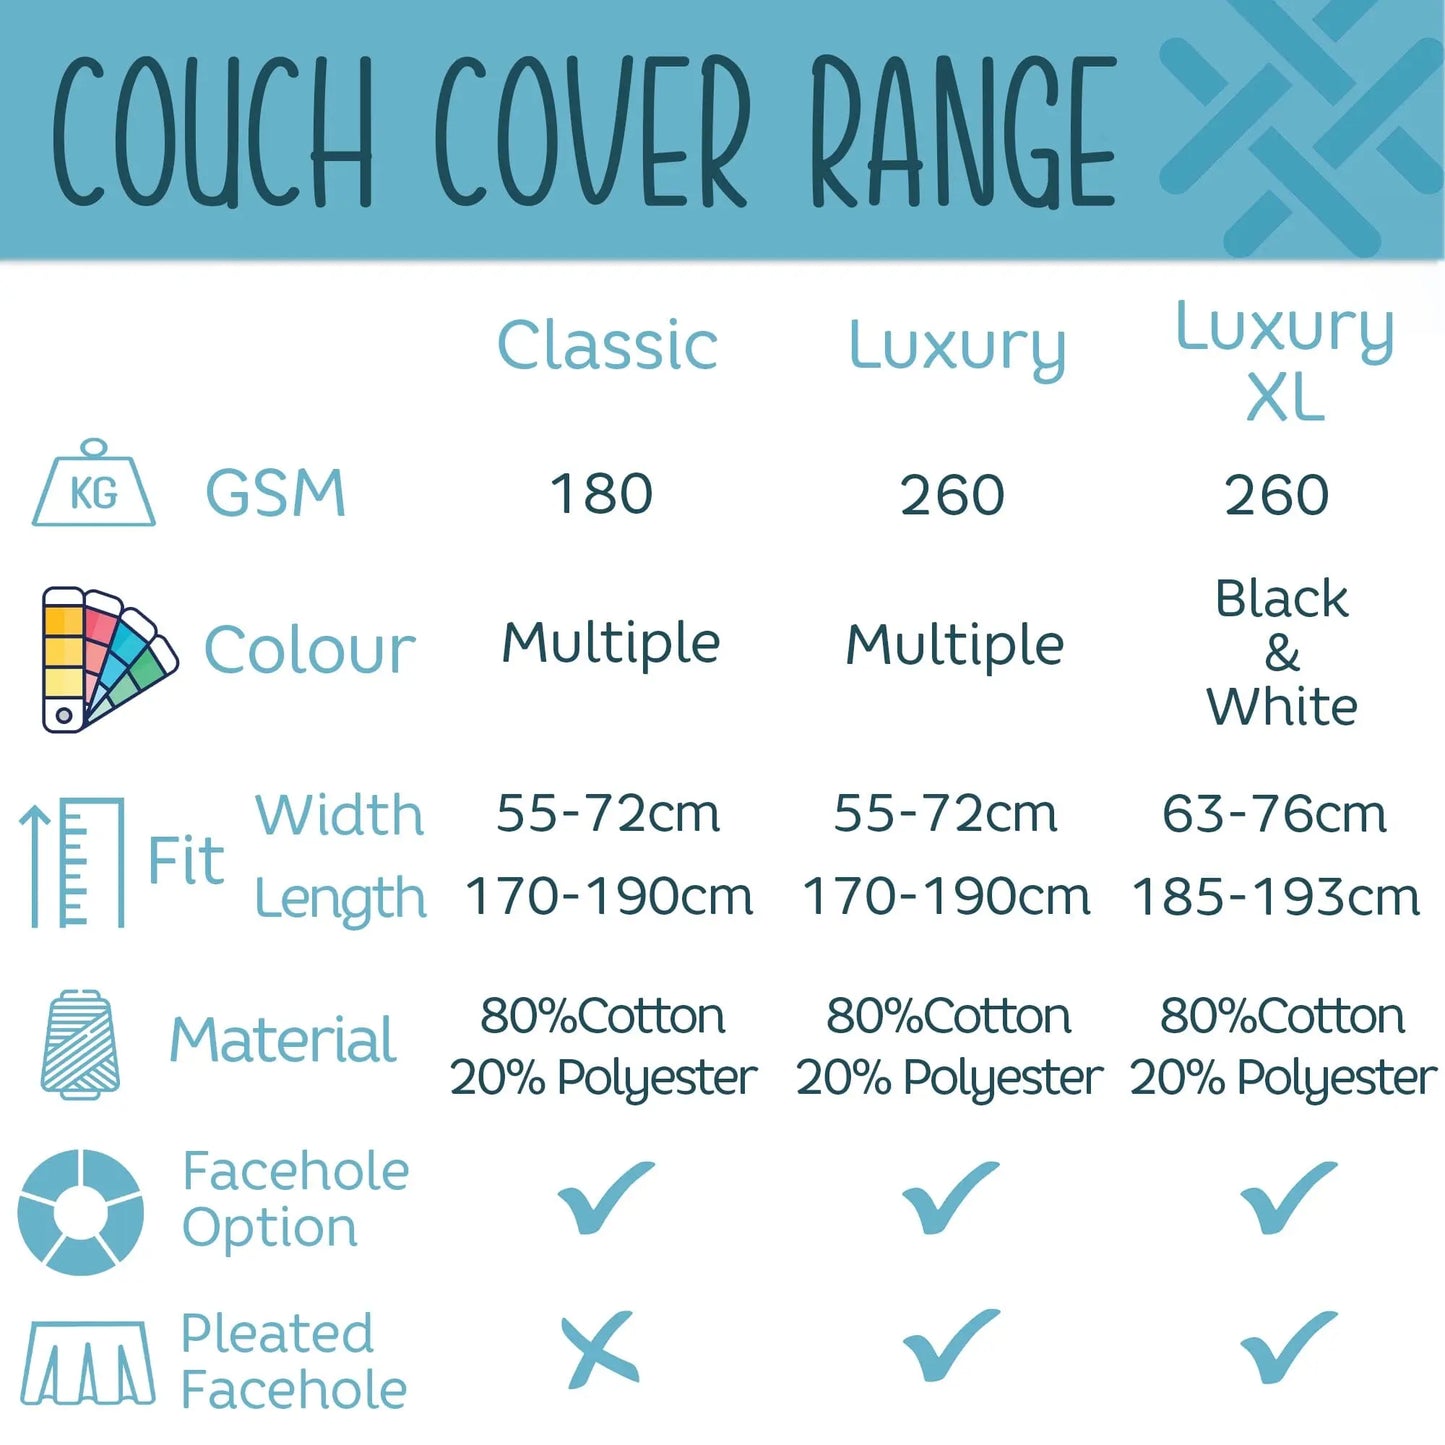 Couch cover range comparison infographic